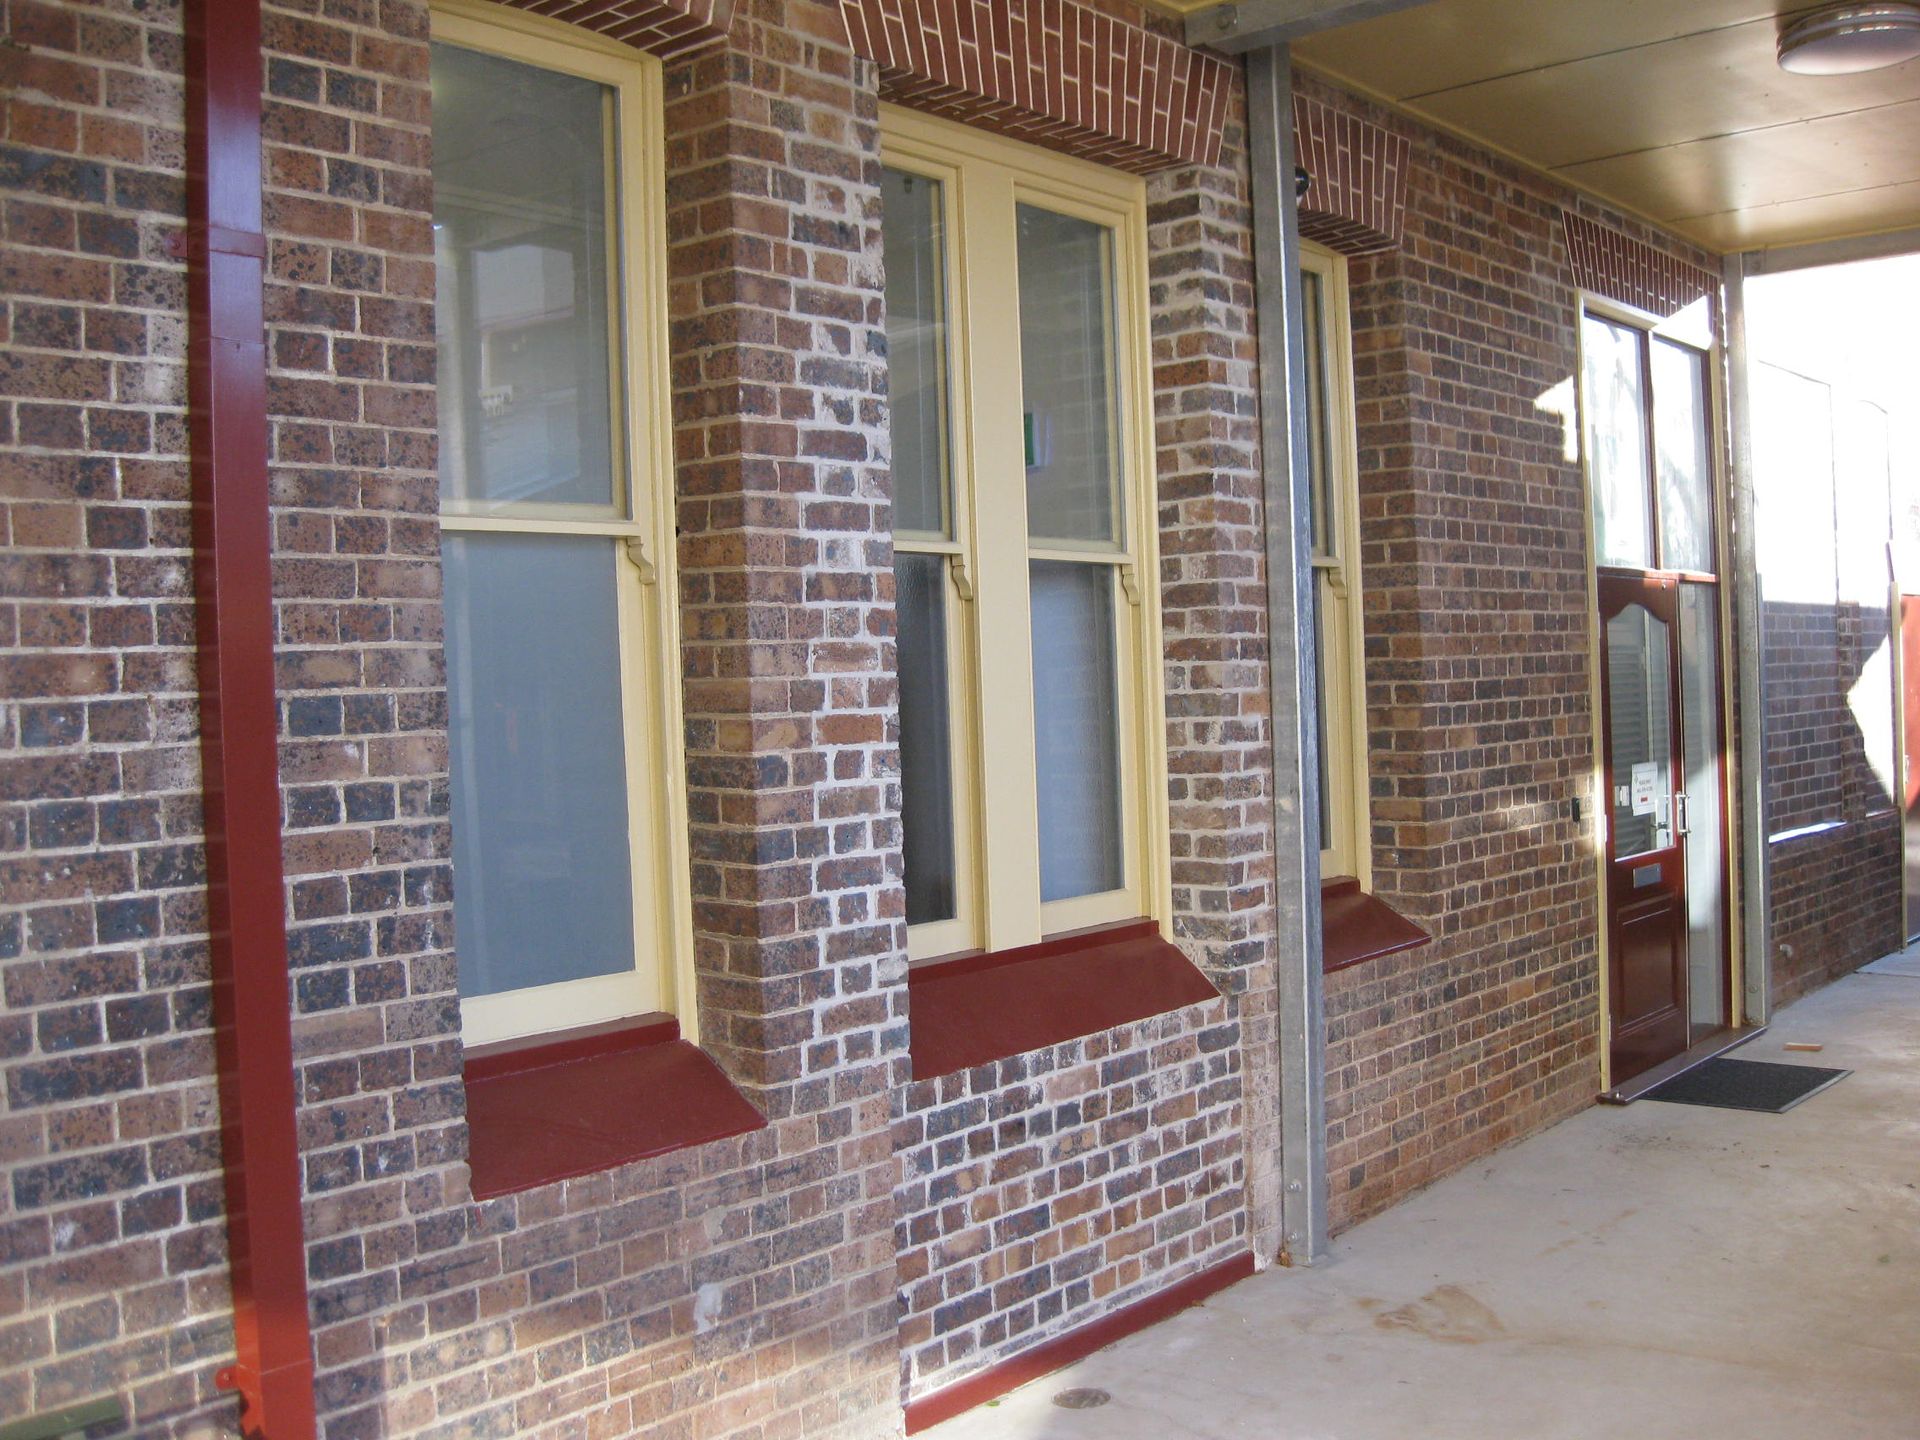 a brick building with three windows and a door with red painted trims